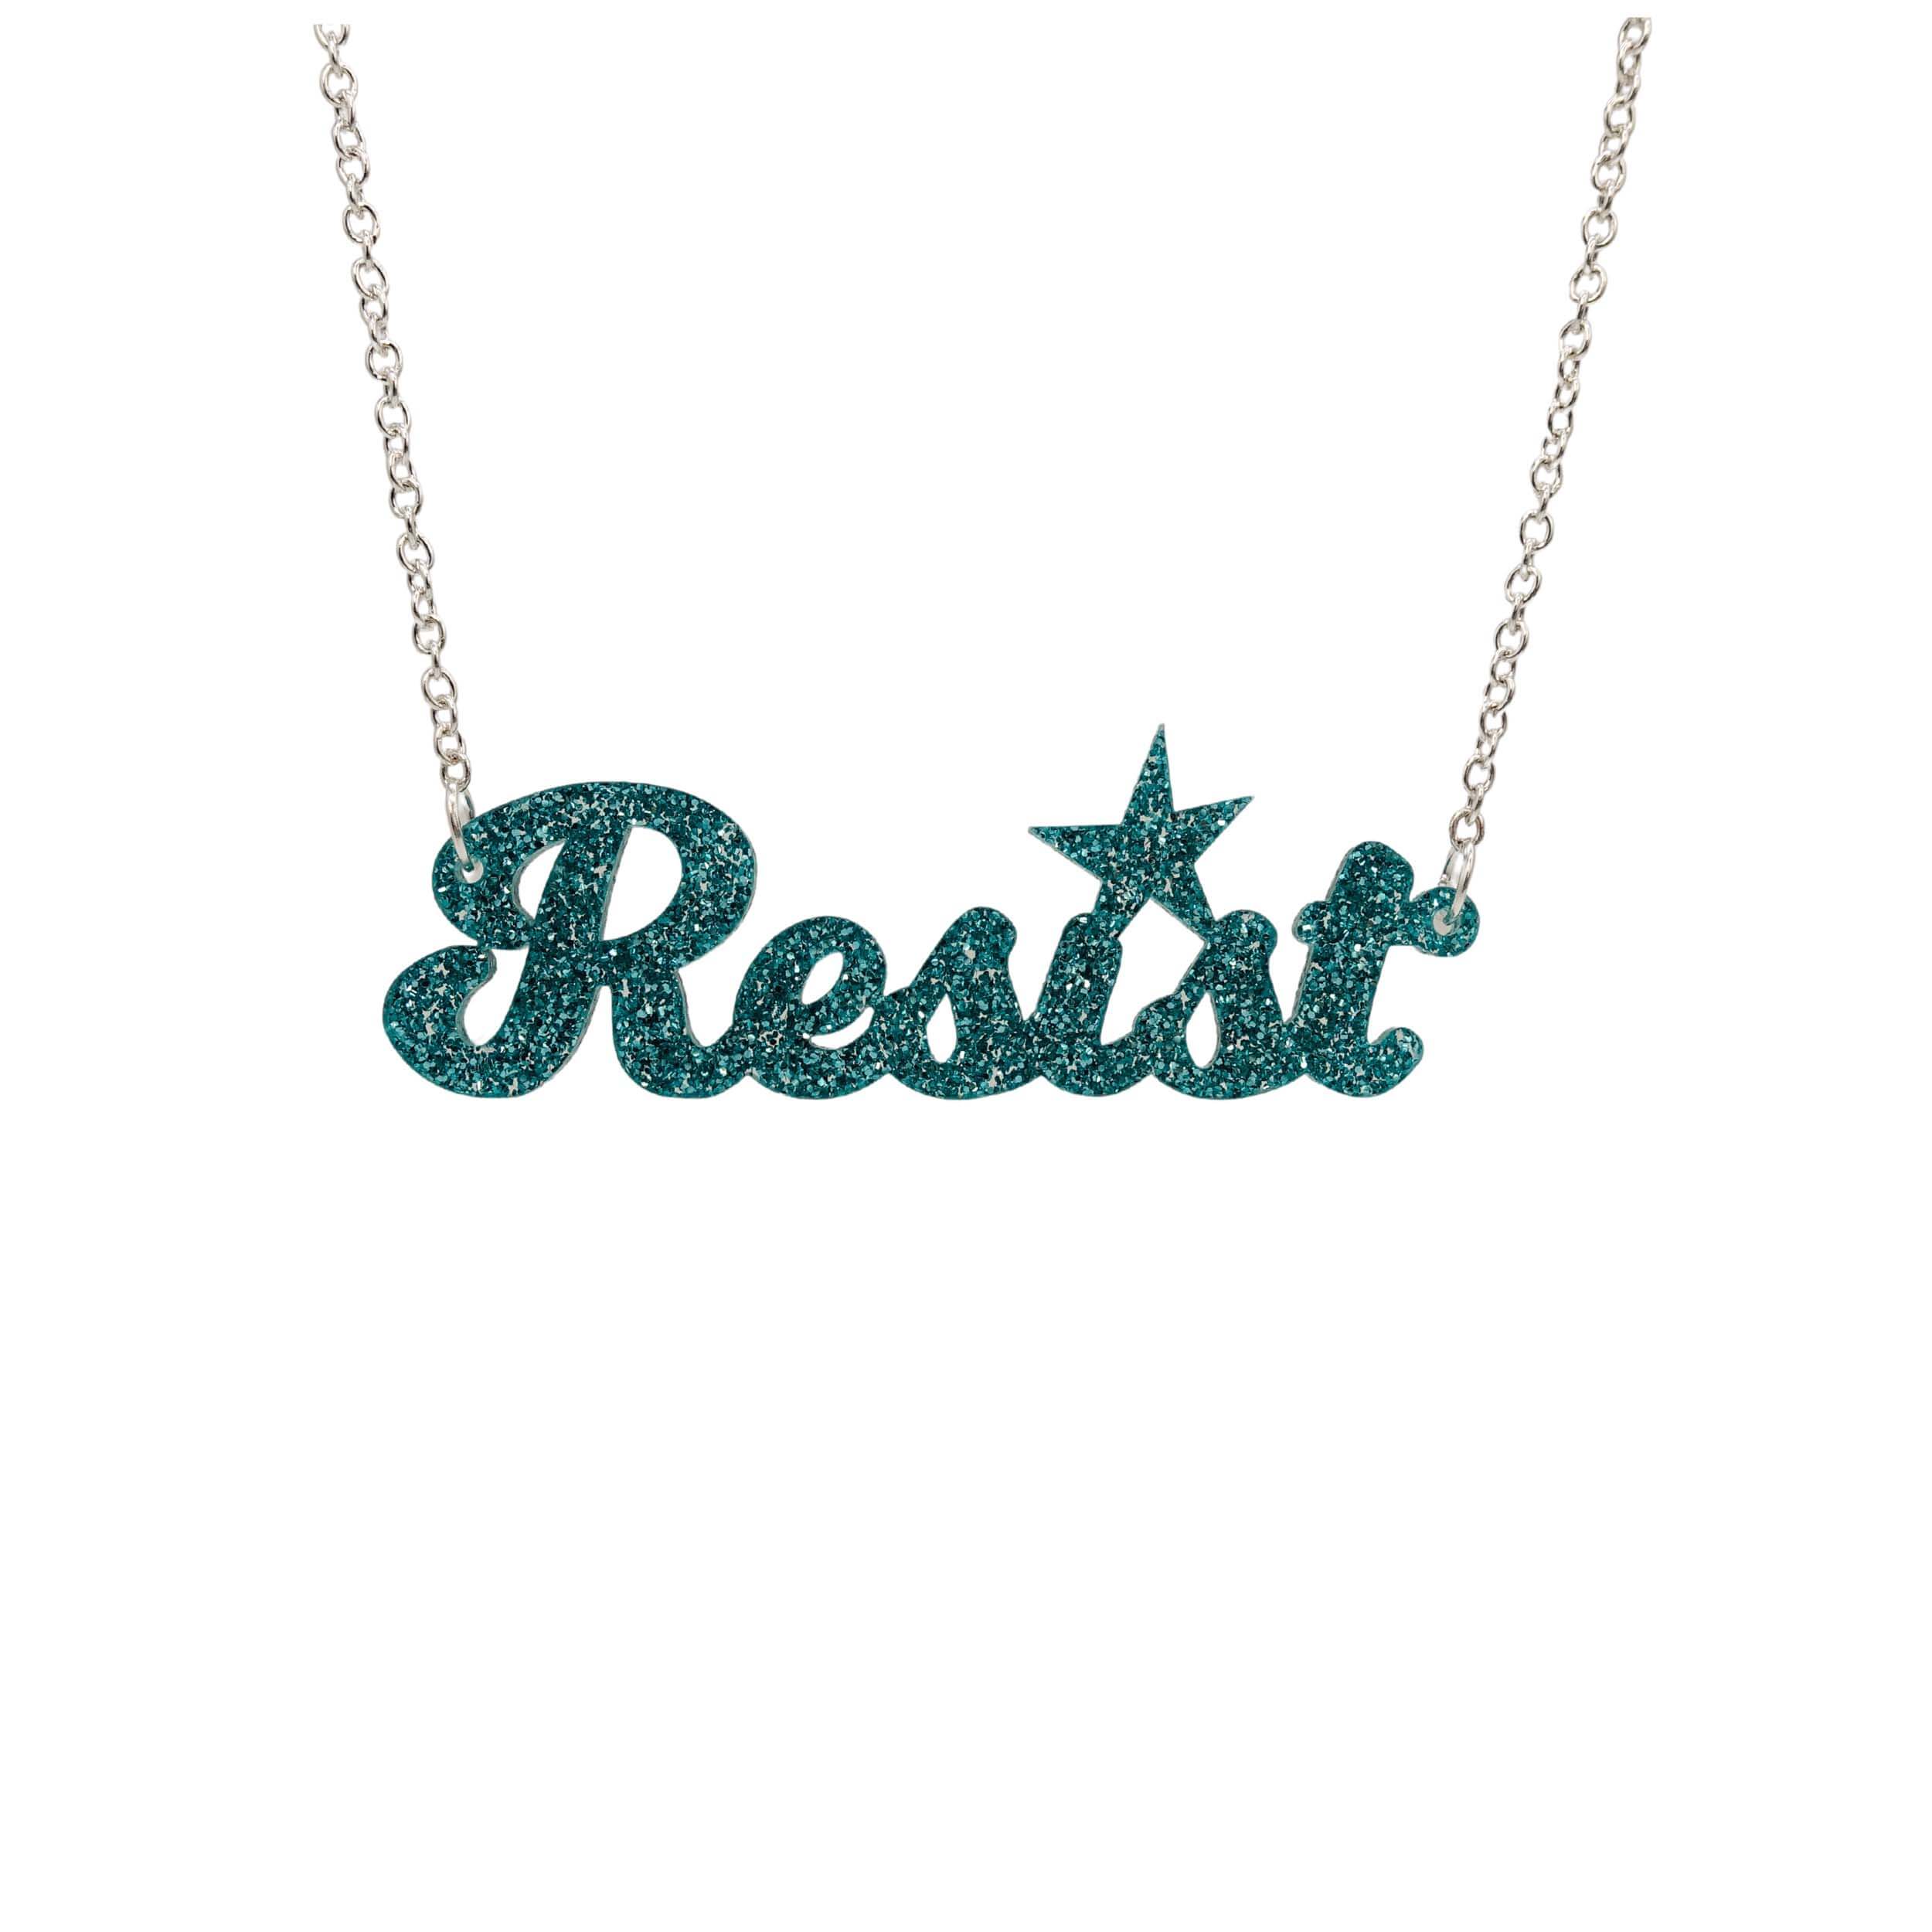 Teal glitter script Resist necklace shown hanging against a white background. 